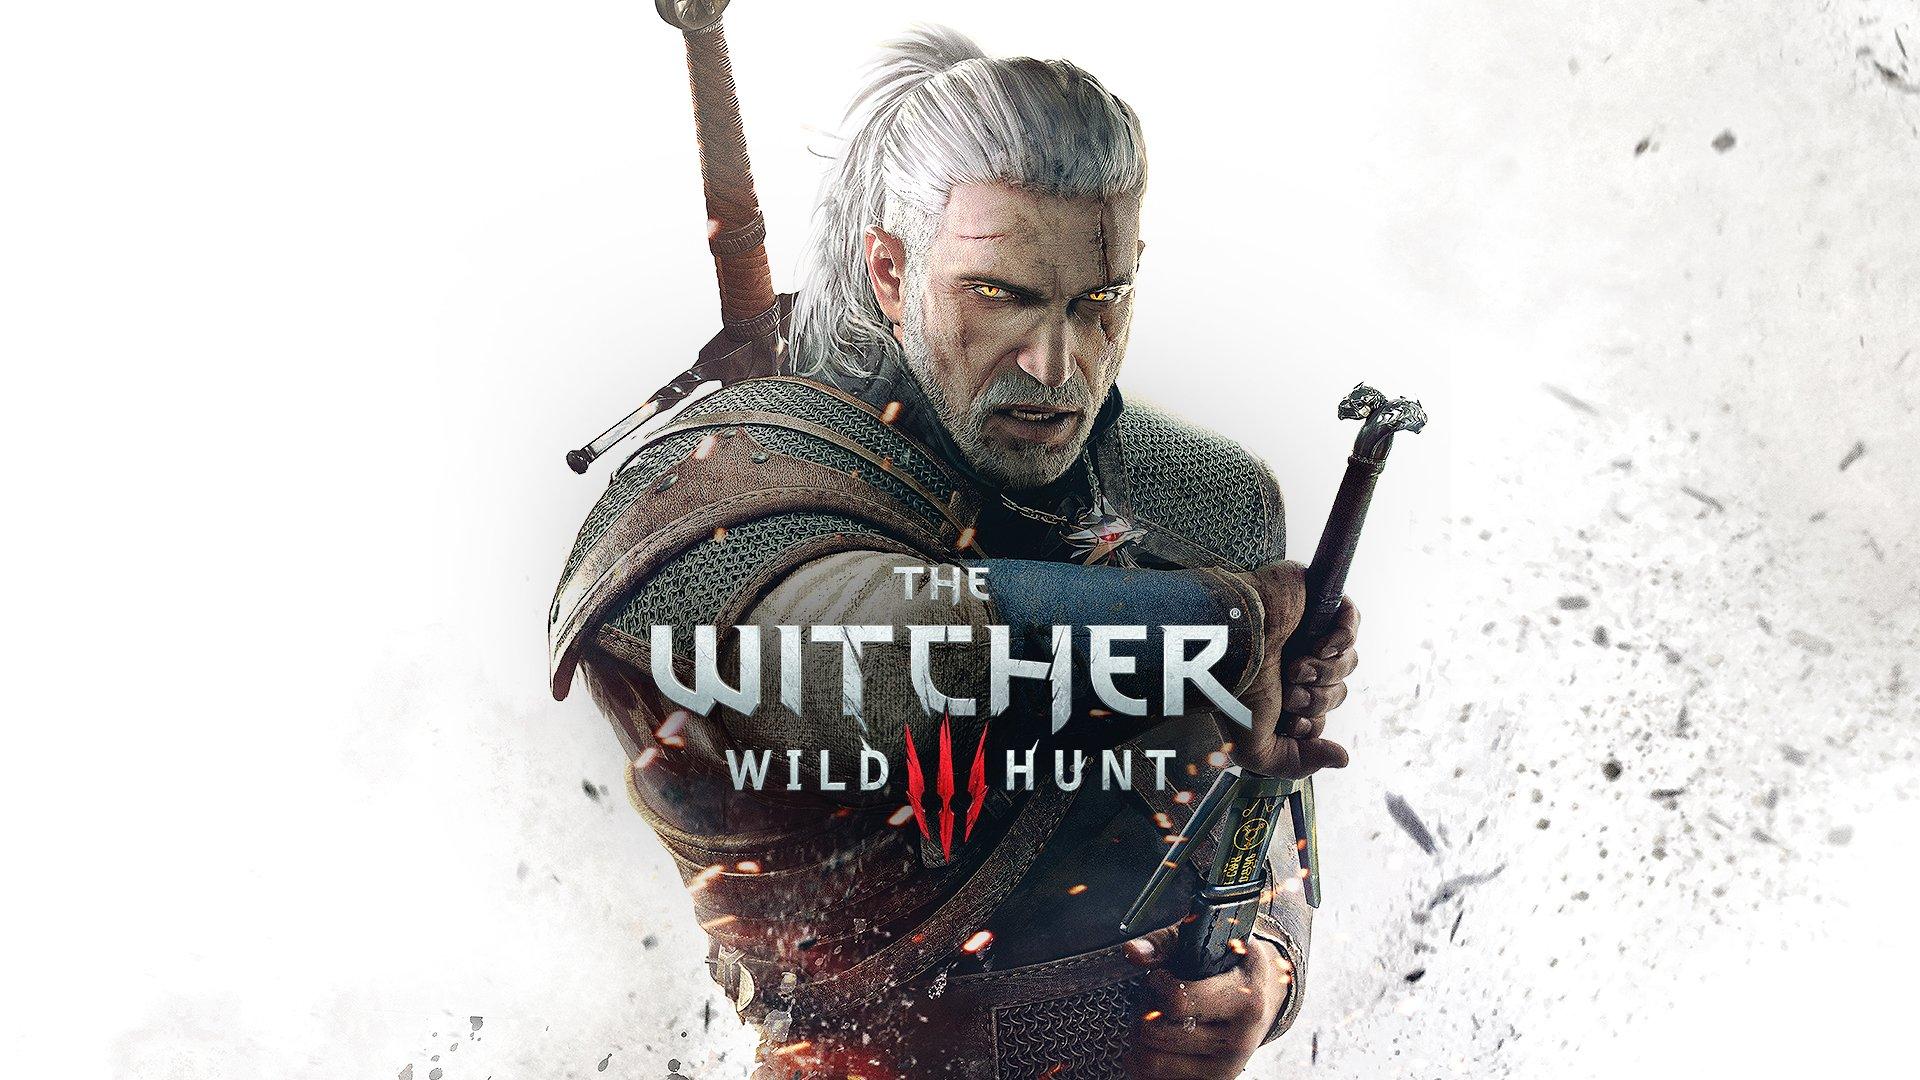 the witcher game ps3